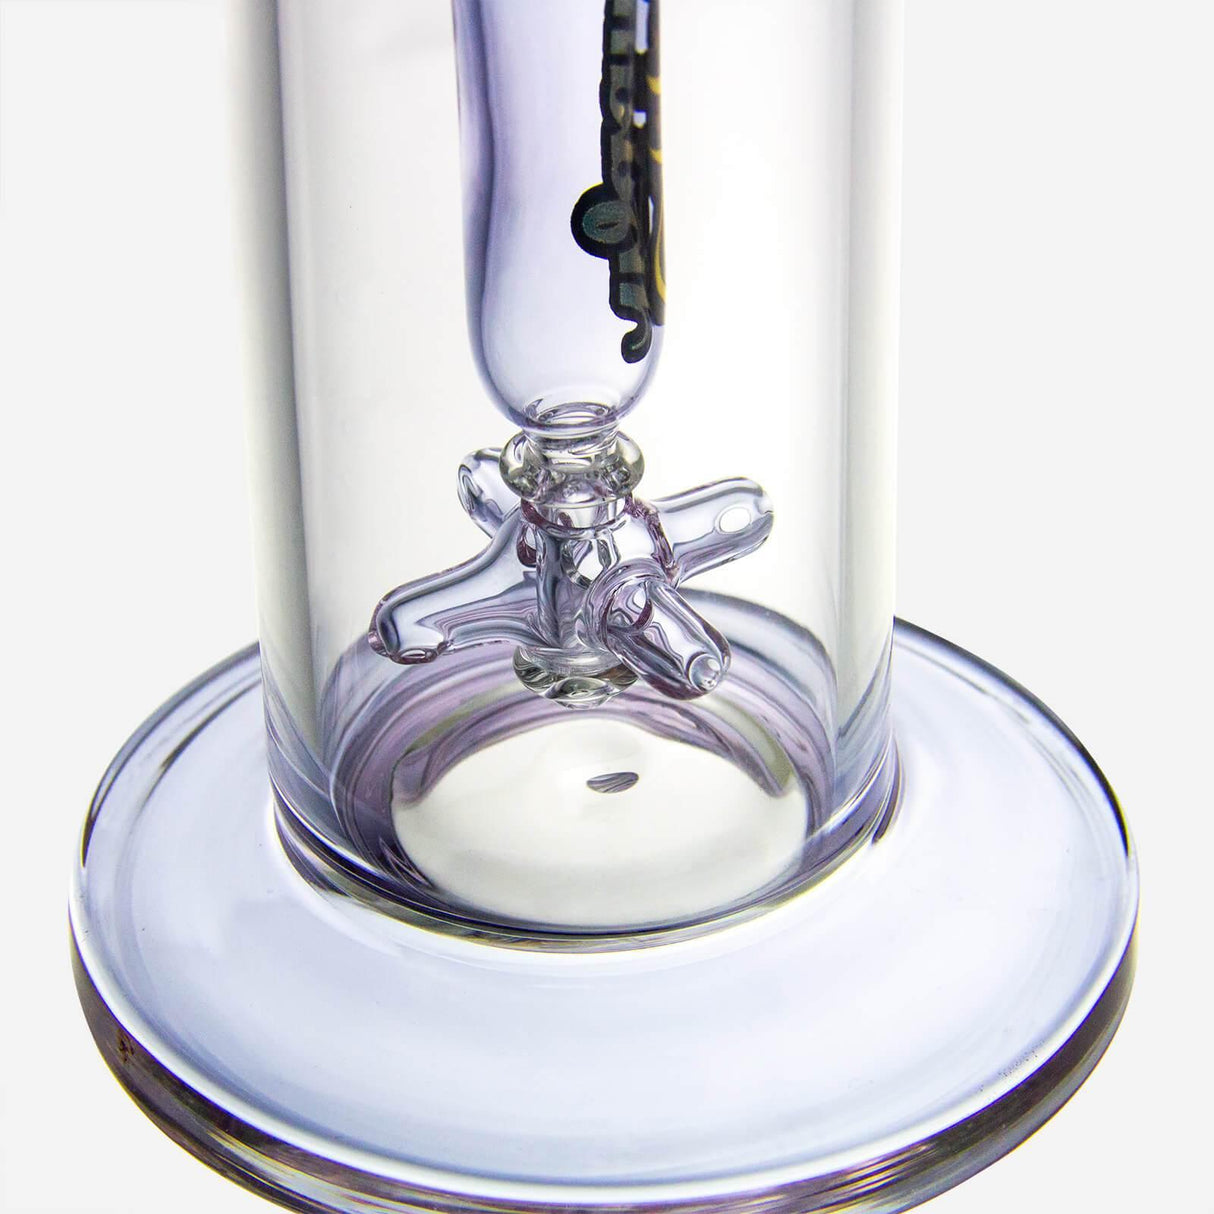 PILOT DIARY Hephaestus Swing Arm Dab Rig close-up, clear glass with sturdy base